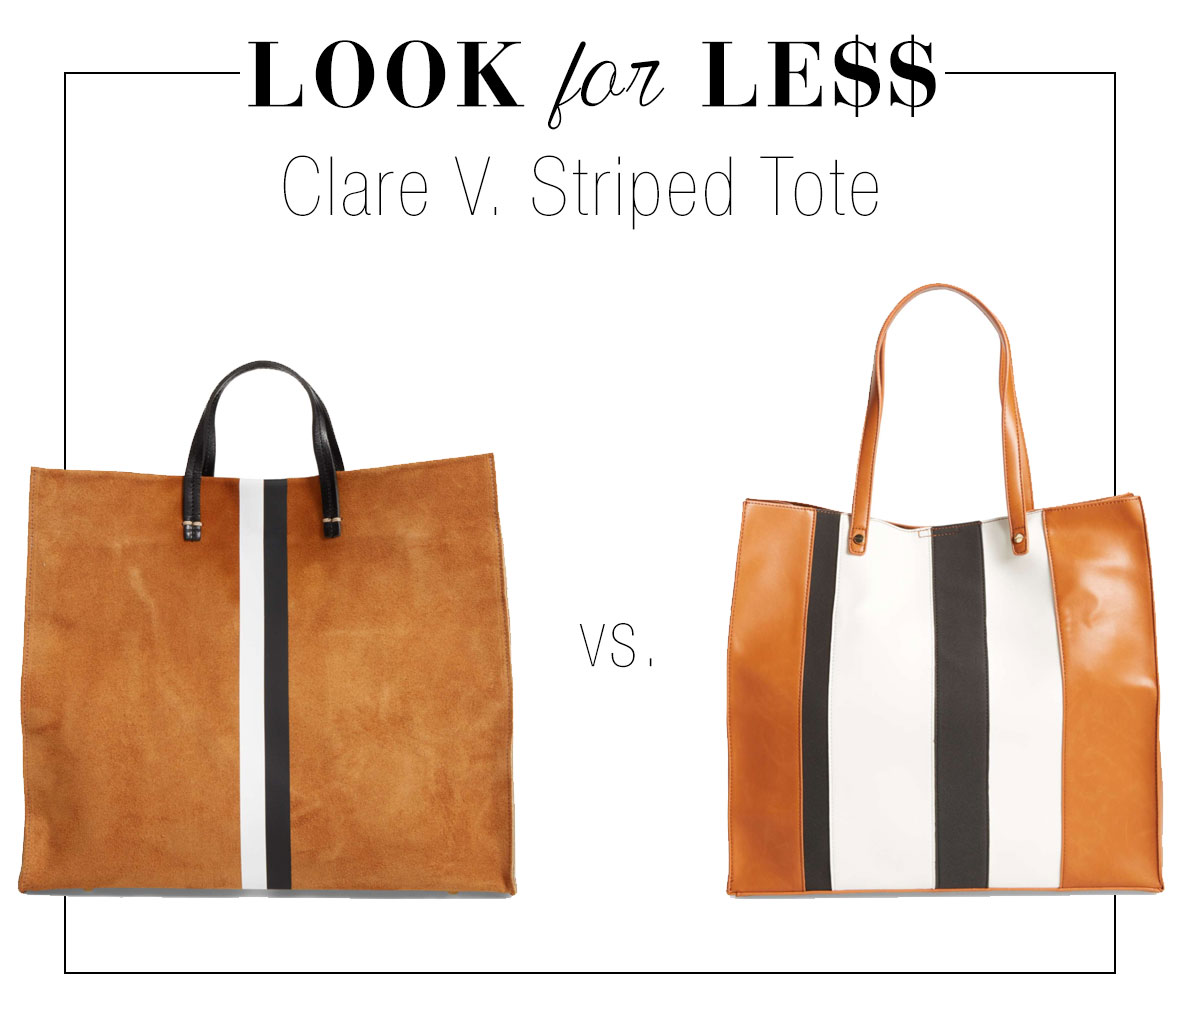 Get the look of Clare V's striped tote for less.